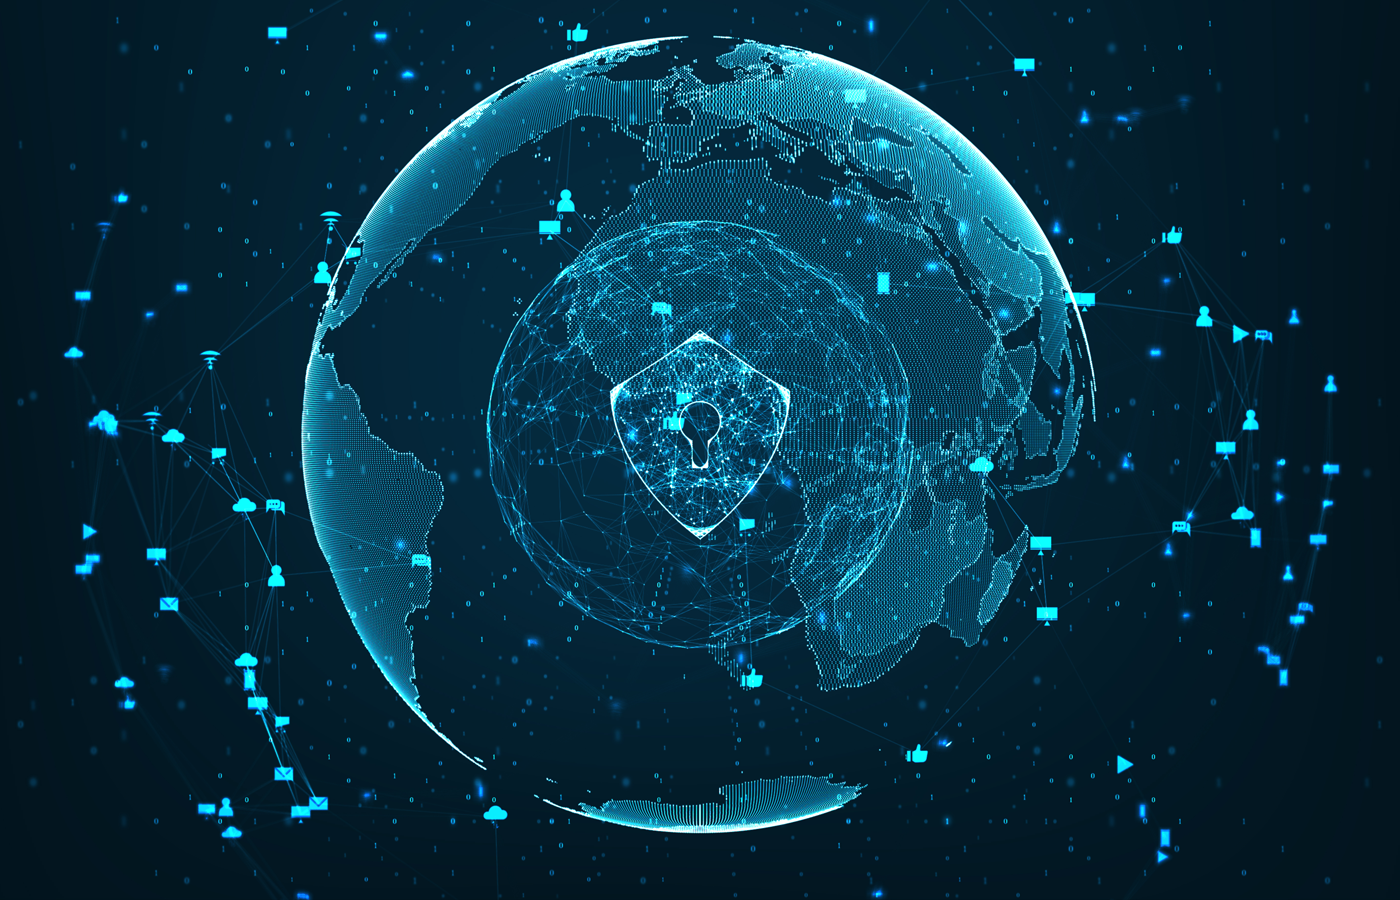 Virtual shield and globe surrounded by a network related icons.